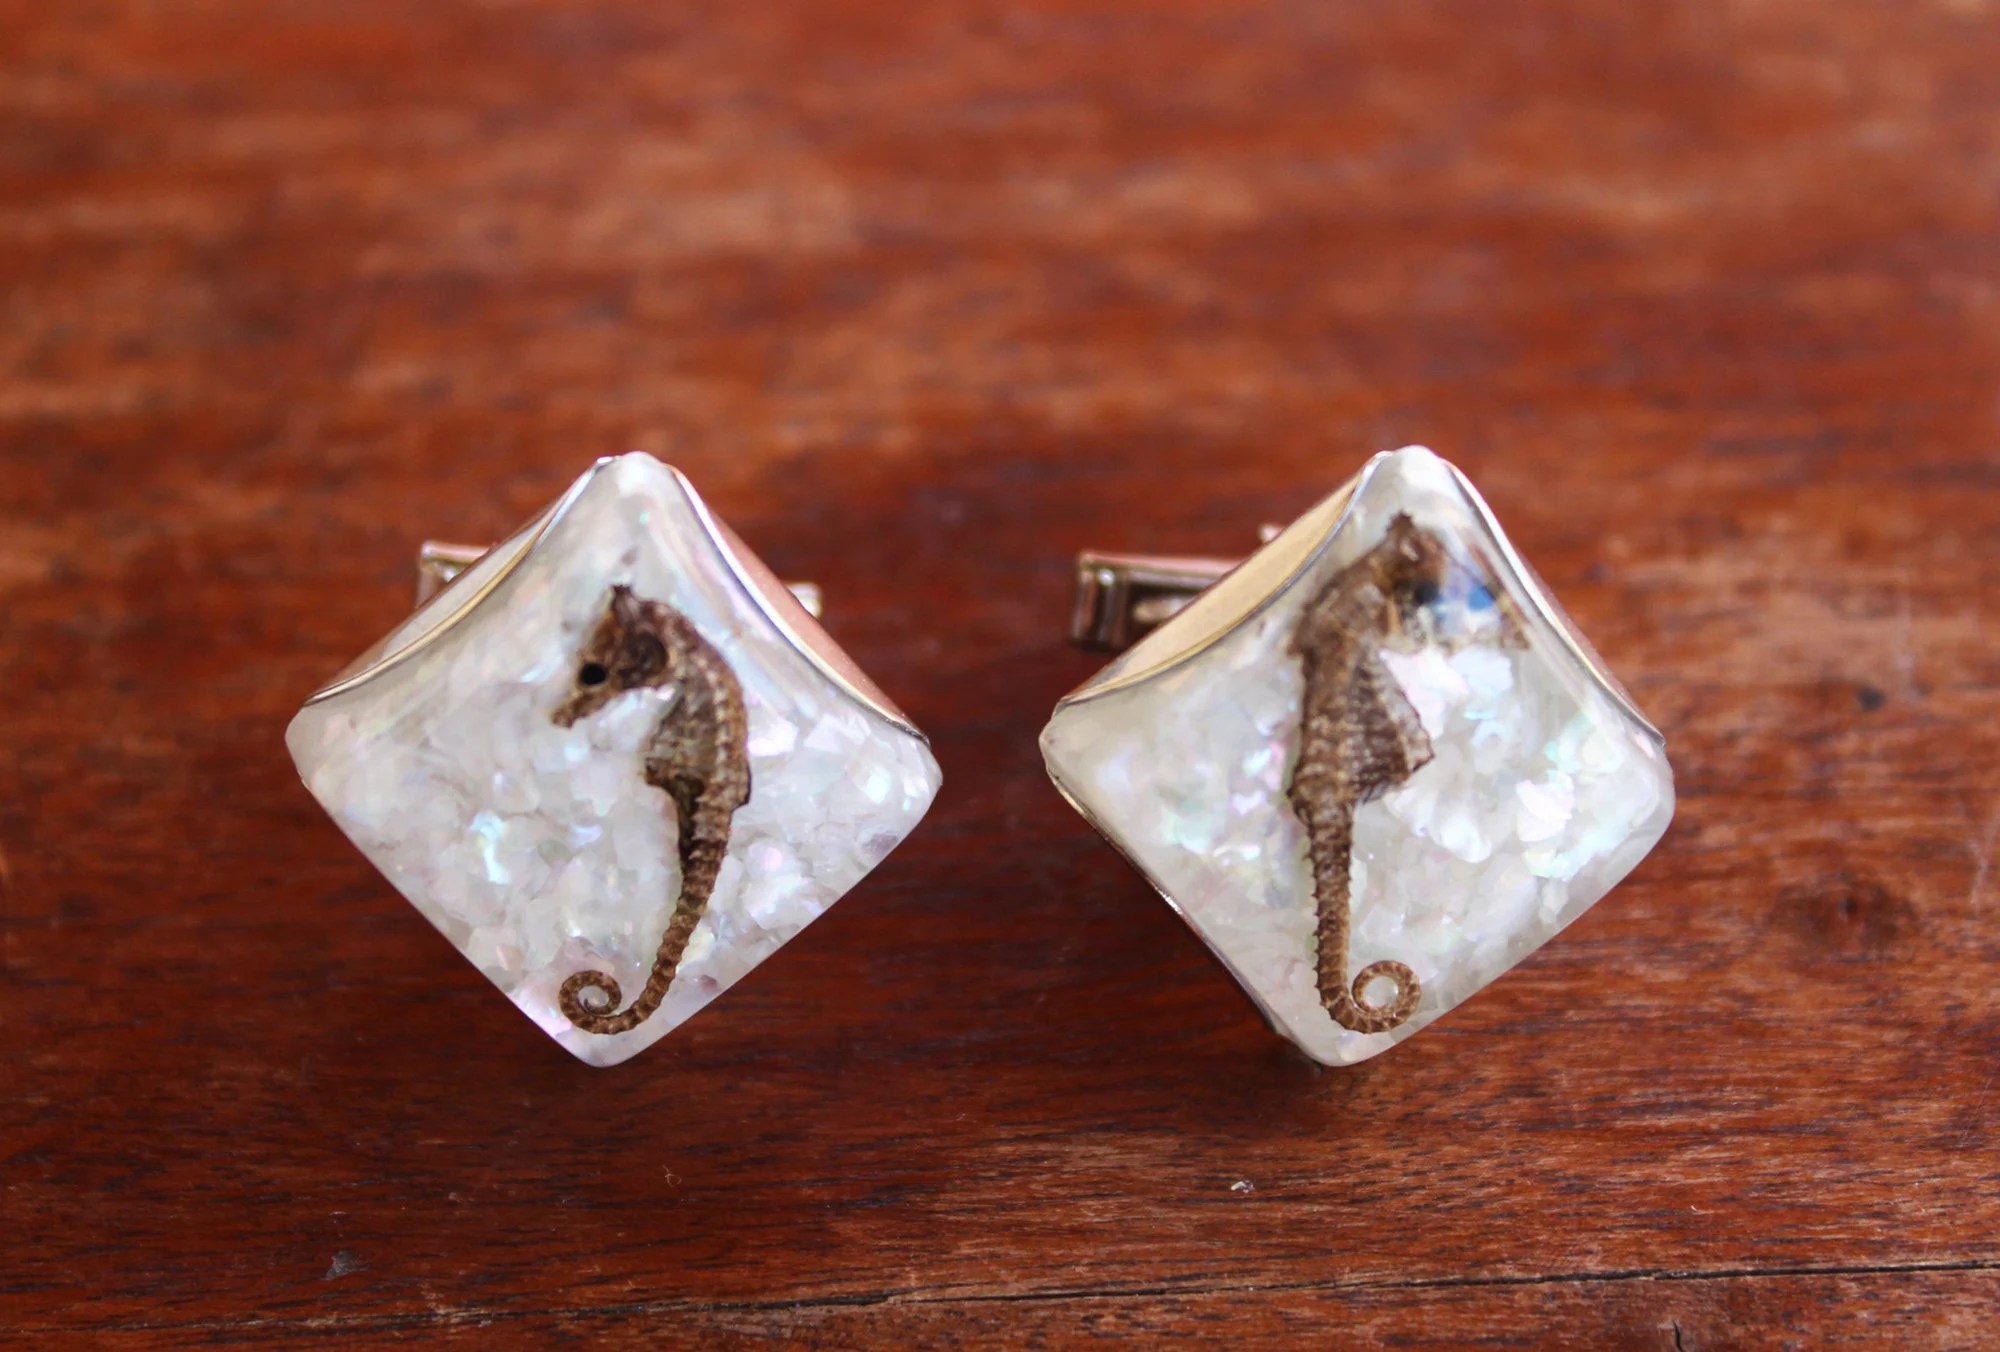 White Iridescent Confetti Lucite Real Seahorse Fossil Cufflinks - Vintage, Mid Century, MCM, Nautical, Retro, Gifts for Him, Cuff Links